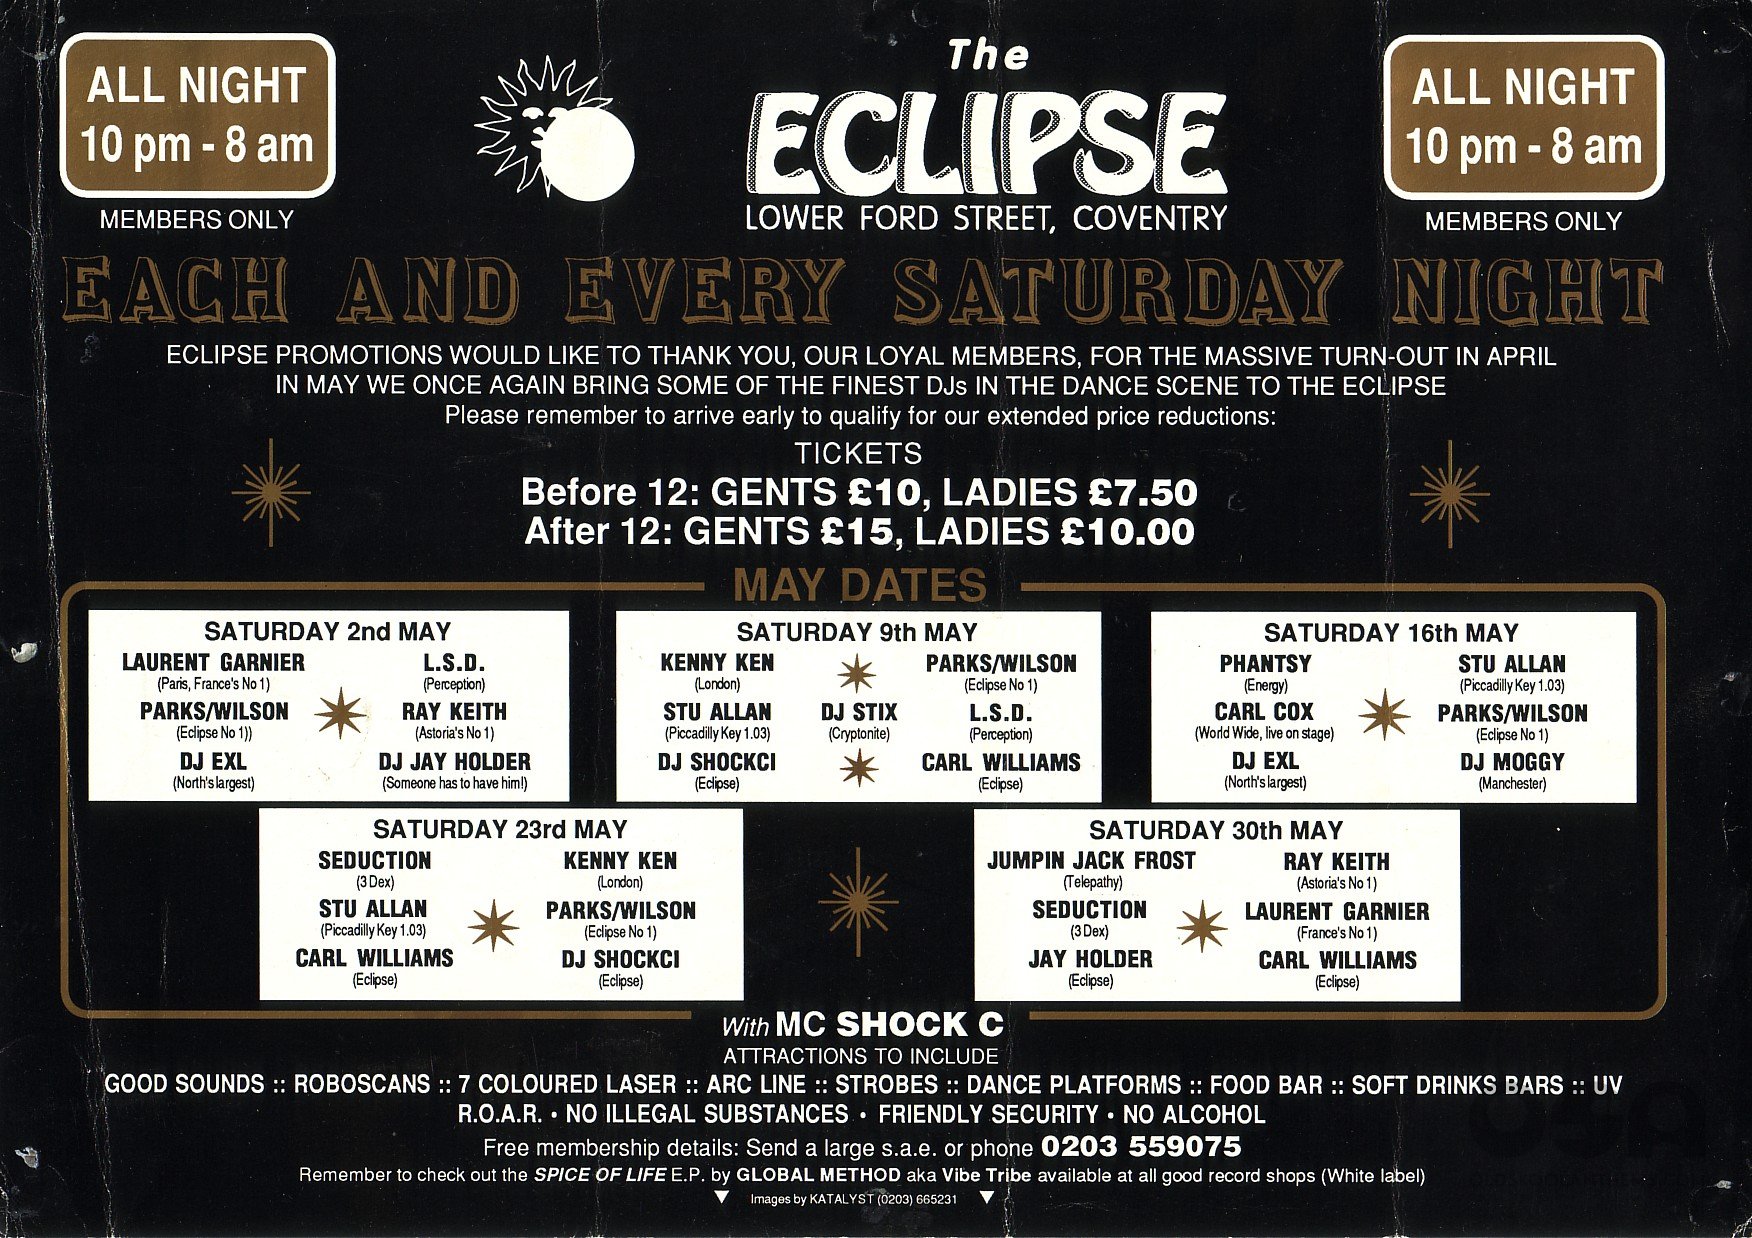 1_The_Eclipse_Coventry_The_Best_Bar_None_May_Dates_92_rear_view.jpg